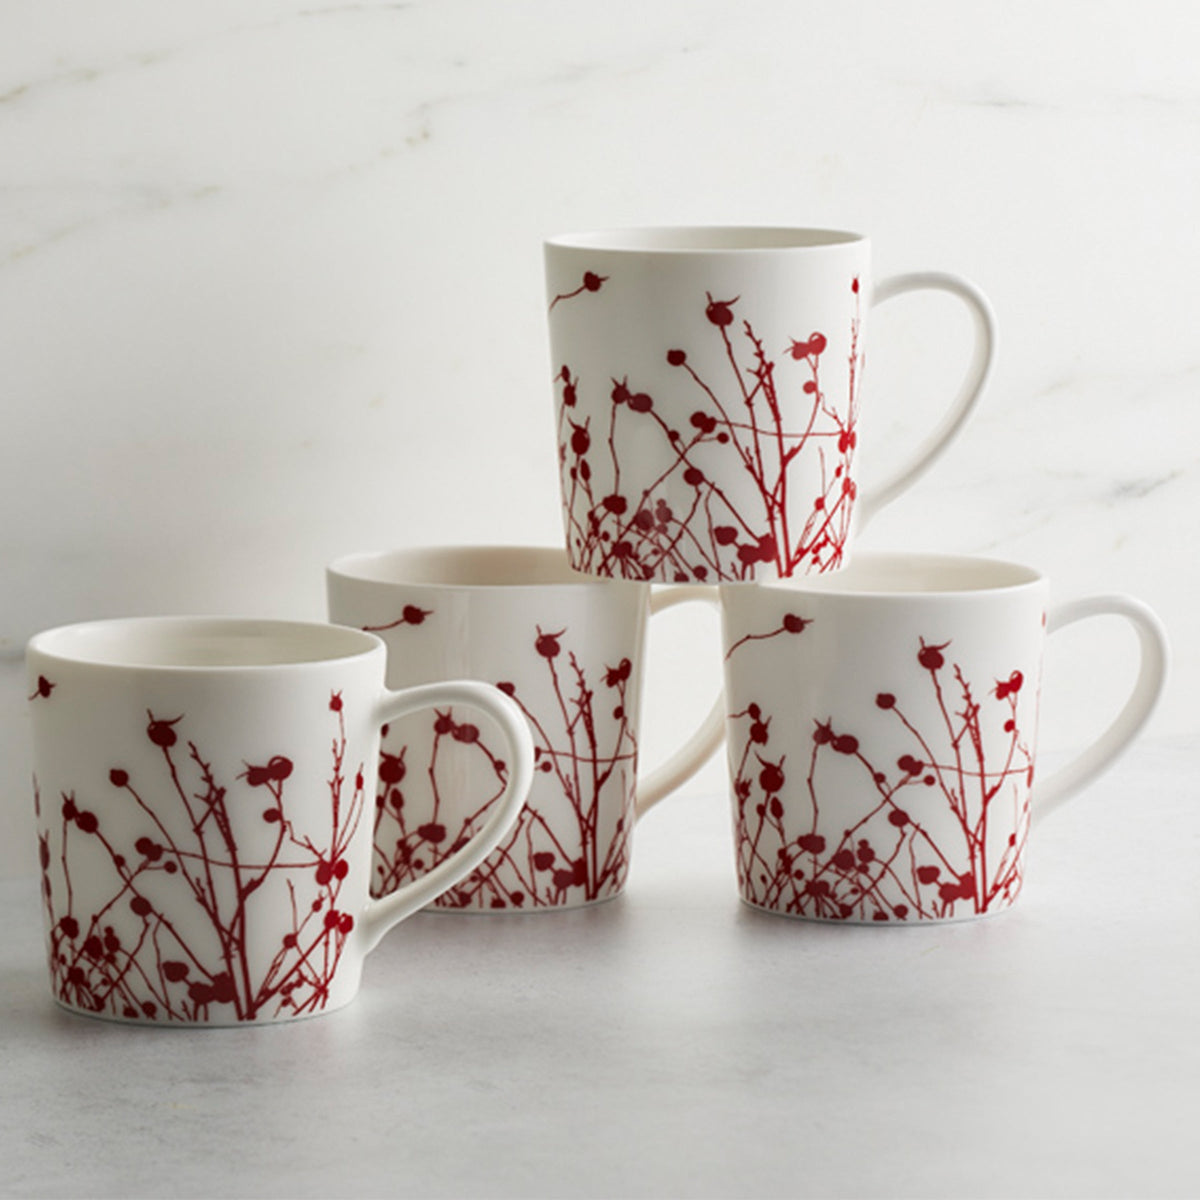 Four generously sized Winterberries Mugs made of creamy white porcelain, each adorned with a red floral pattern reminiscent of winter berries from Caskata Artisanal Home, are arranged on a white surface against a light background.